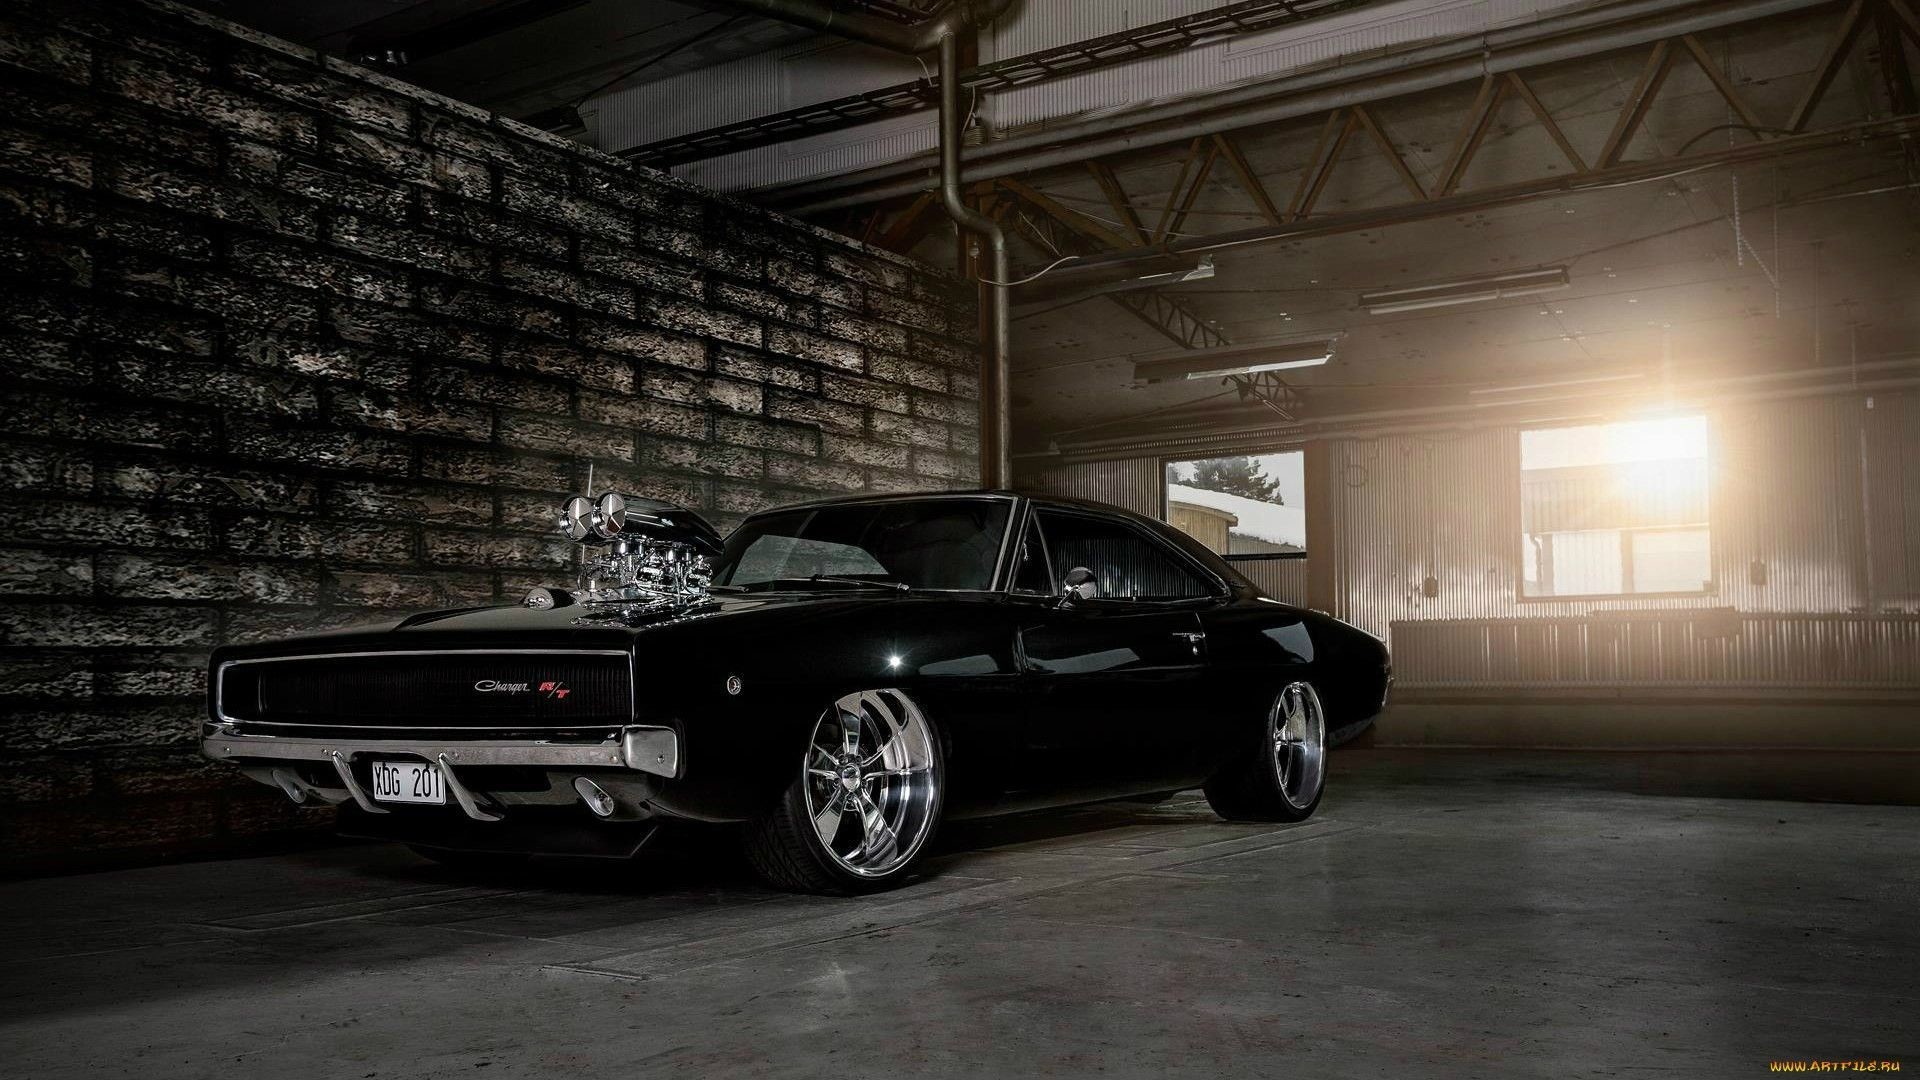 1920x1080 1970 Dodge Charger Wallpapers - Wallpaper Cave | Free Wallpapers .